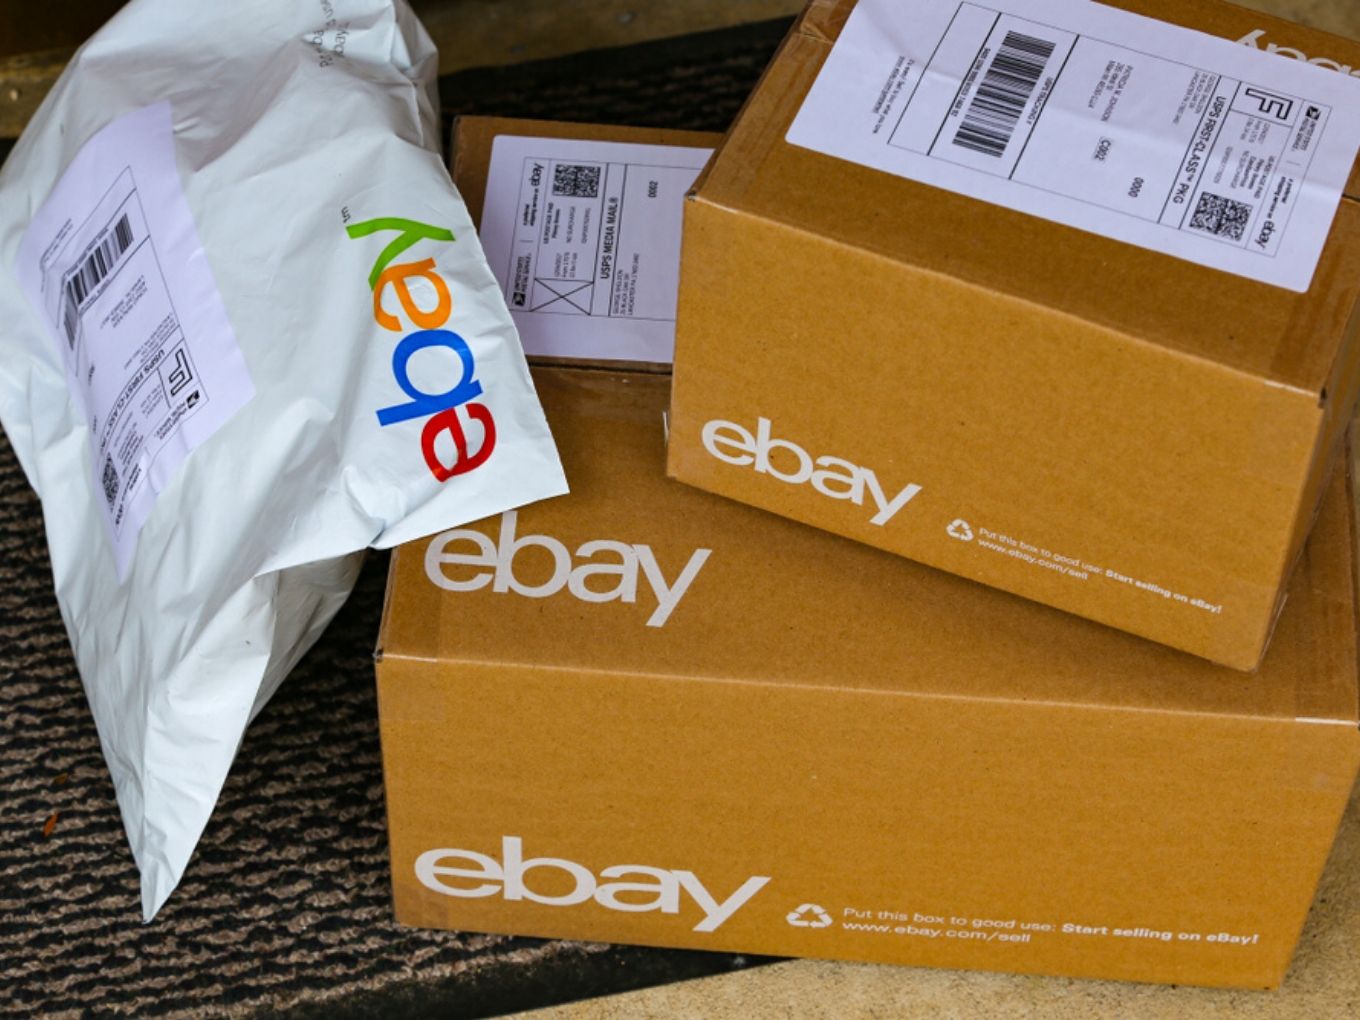 Product Origin Guidelines Will Help eBay, Claims India Head